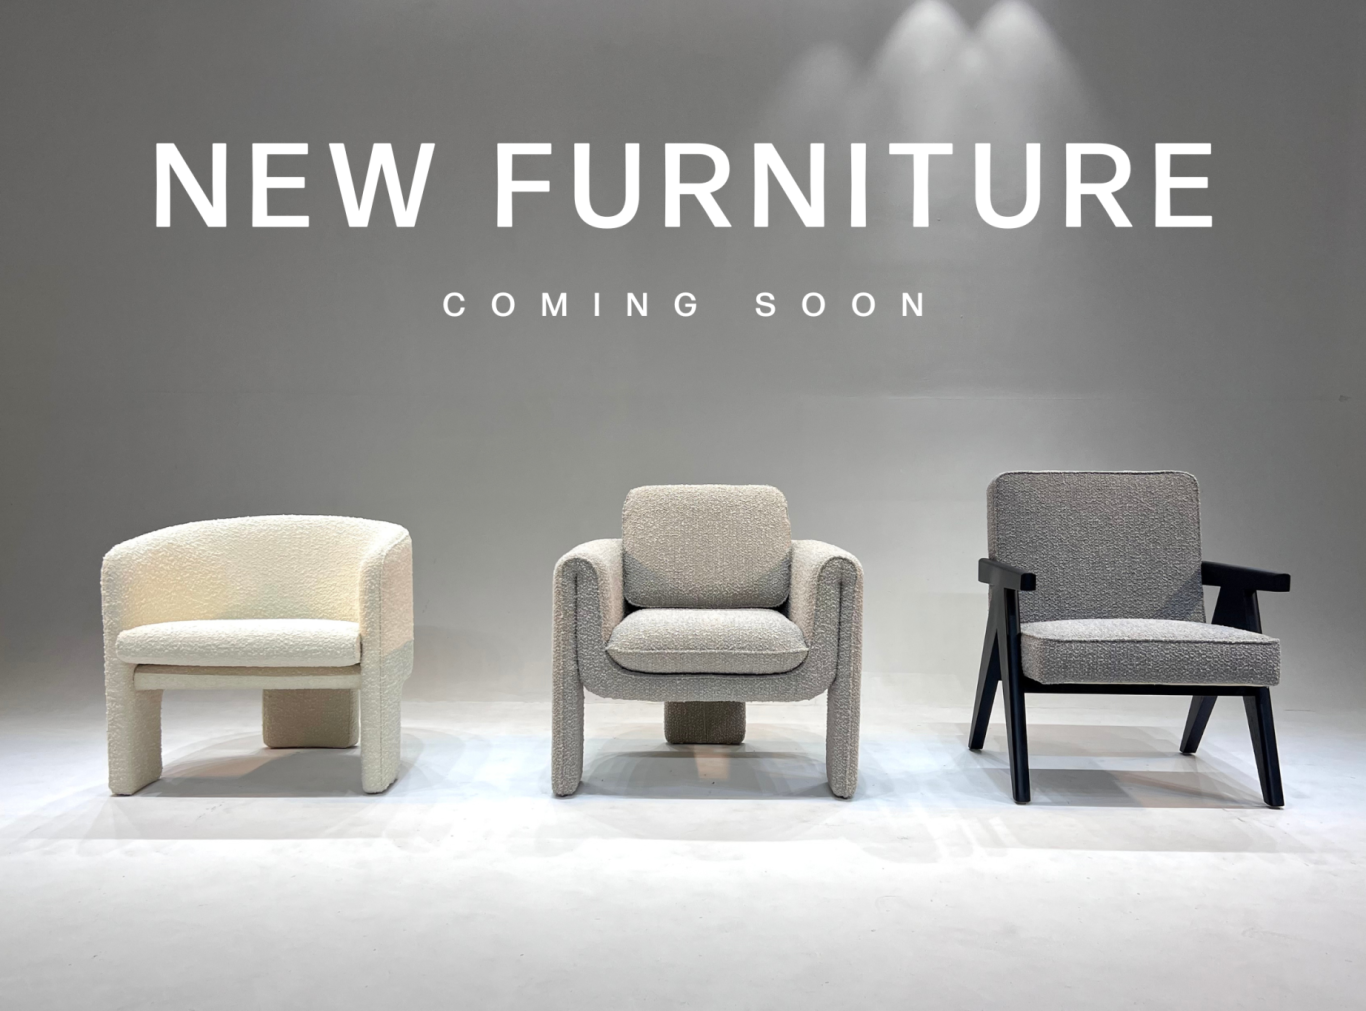 new furniture coming soon, three gorgeous armchairs in boucle fabric